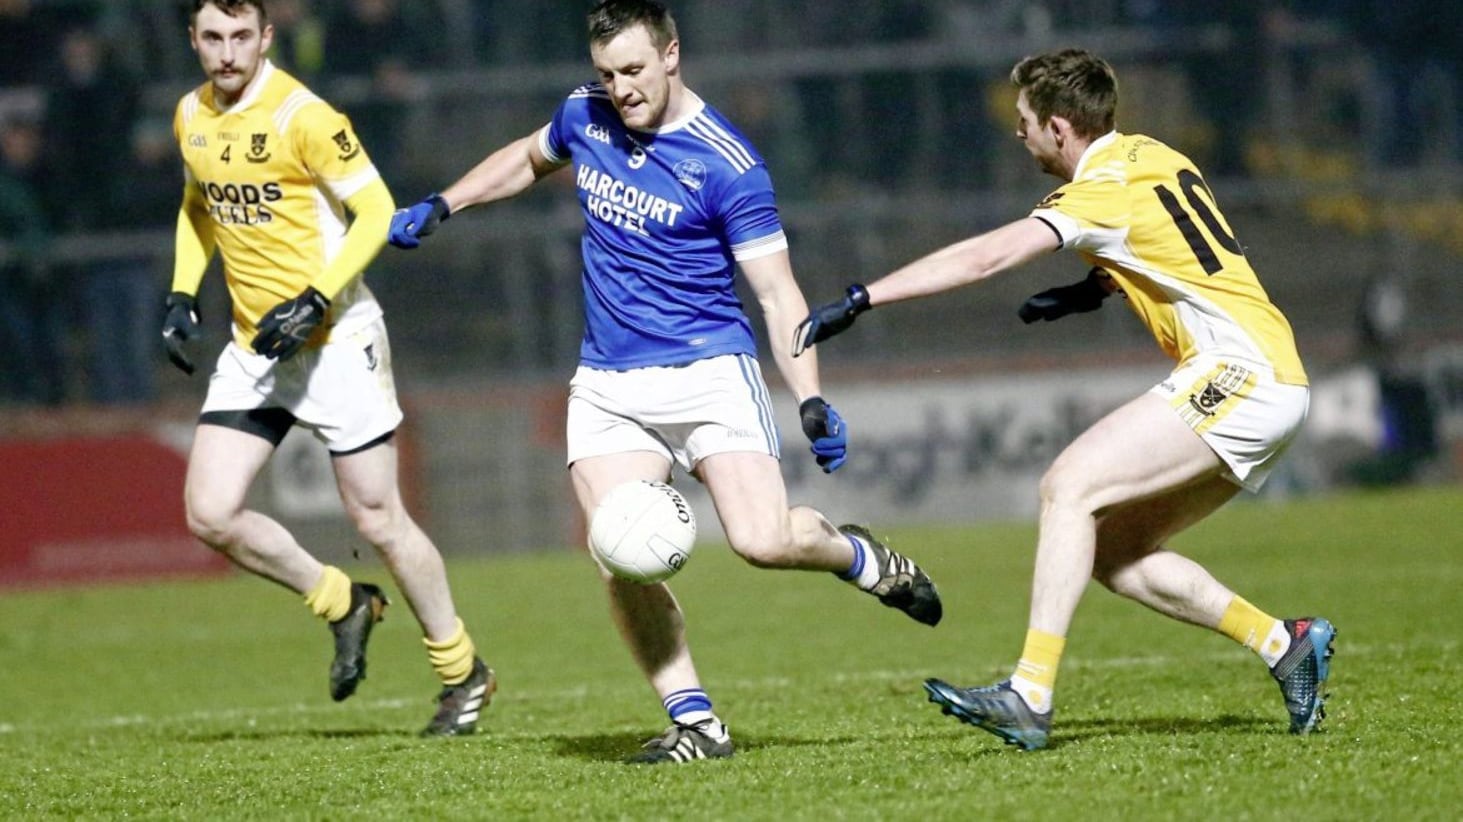 Leo McLoone can provide the leadership Naomh Conaill need to see them past Kilcar in today&#39;s 2020 Donegal SFC final 